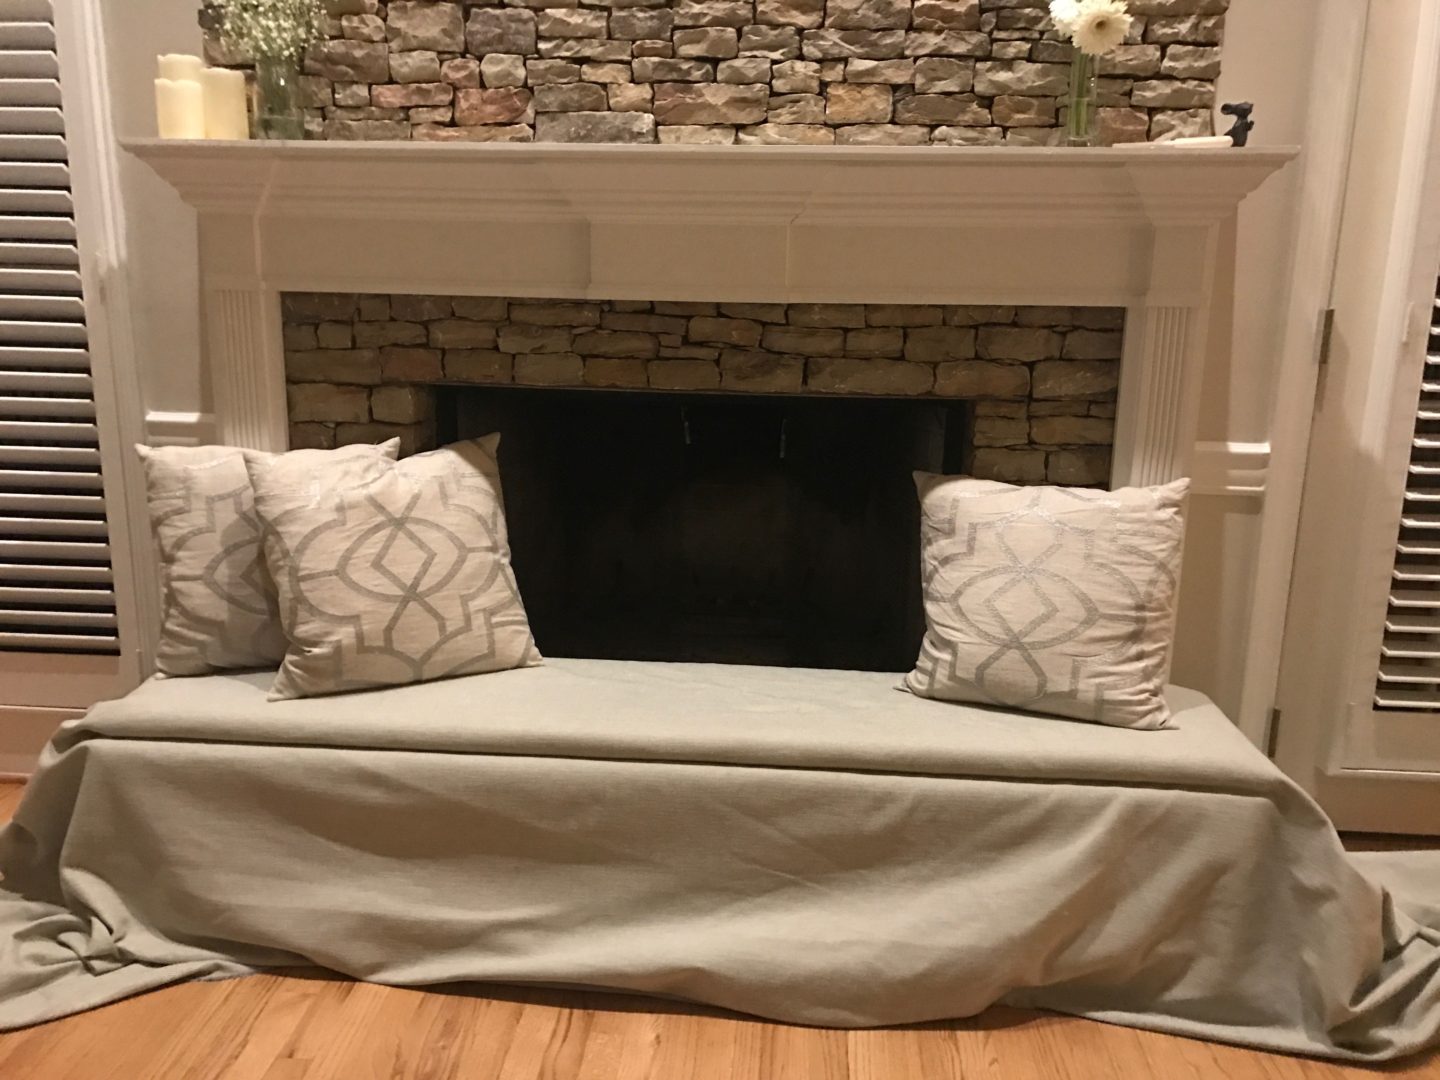 How to make a Fireplace Hearth Cover, DIY